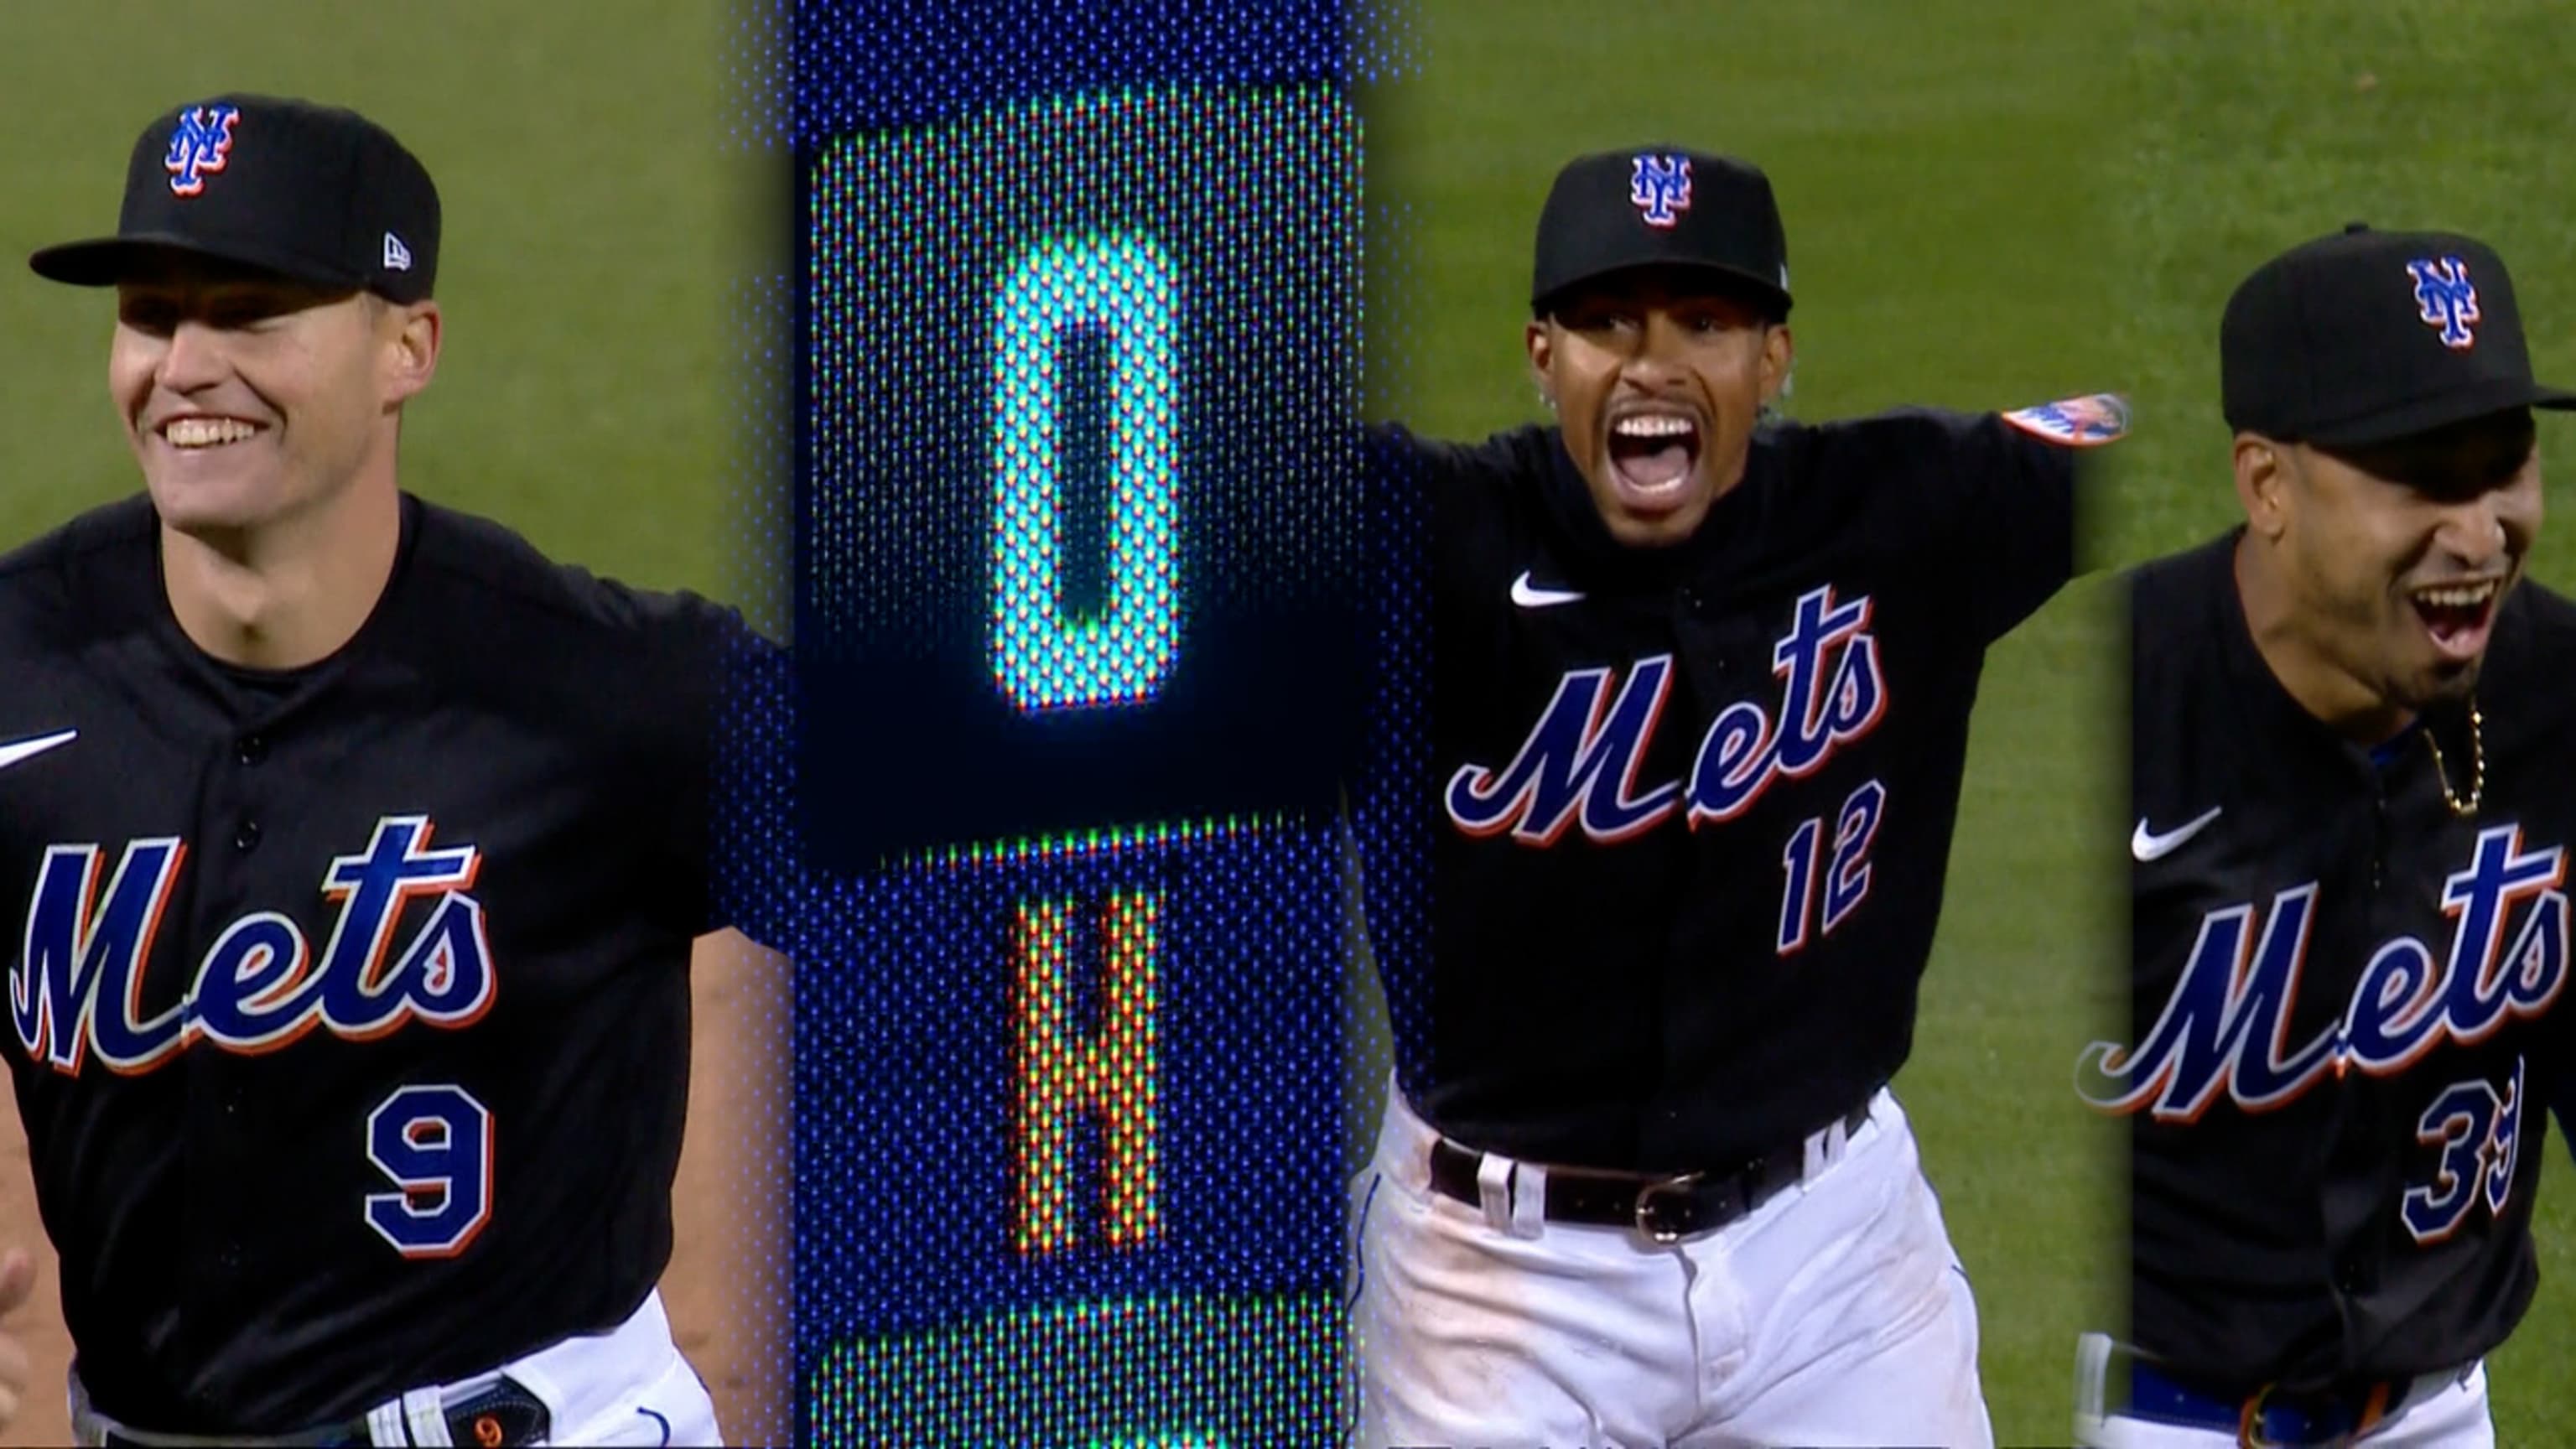 Mets pitching combined no-hitter thru 8 innings vs Phillies